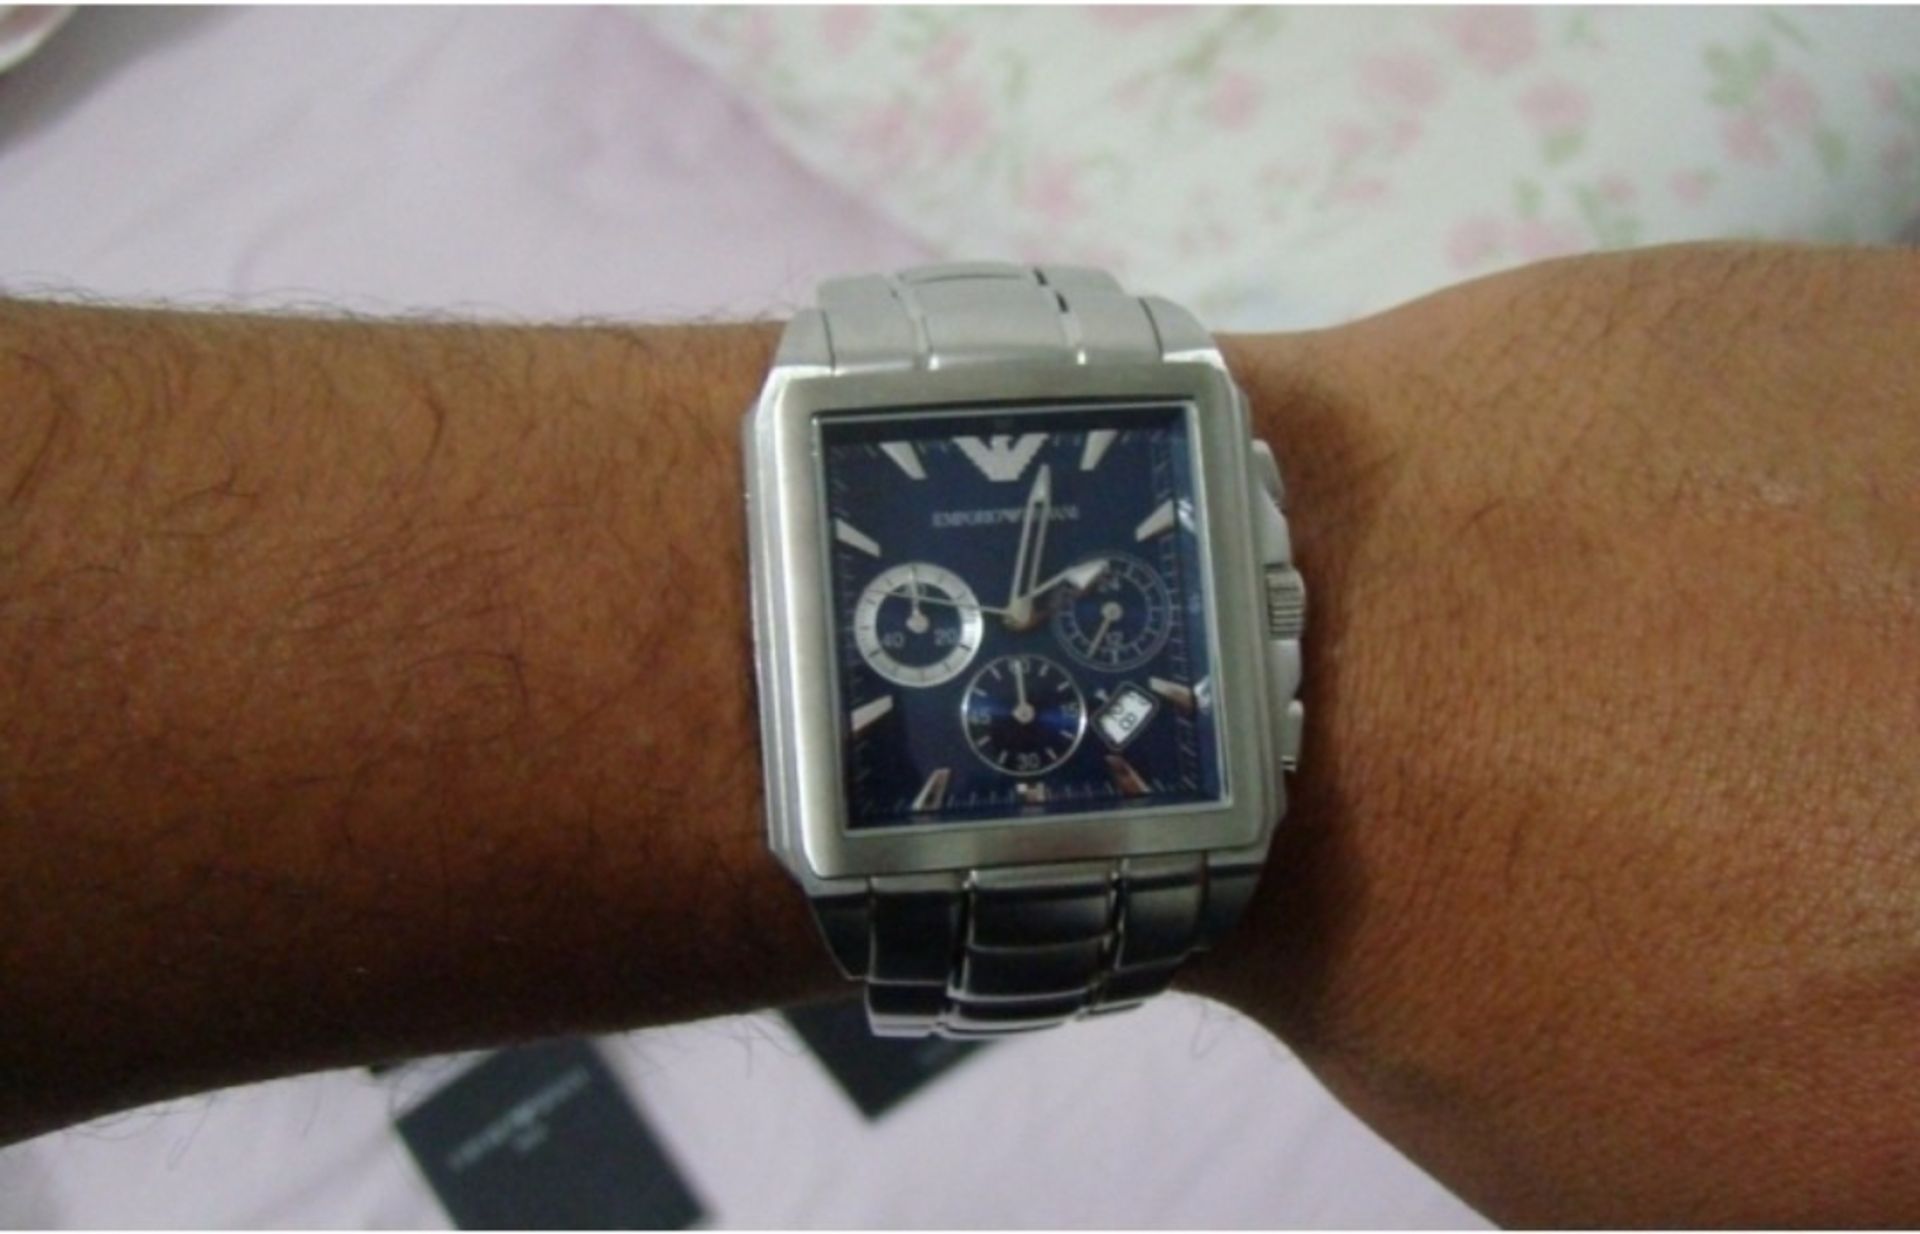 Emporio Armani AR0660 Men's Square Dial Silver Stainless Steel Bracelet Chronograph Watch - Image 6 of 8